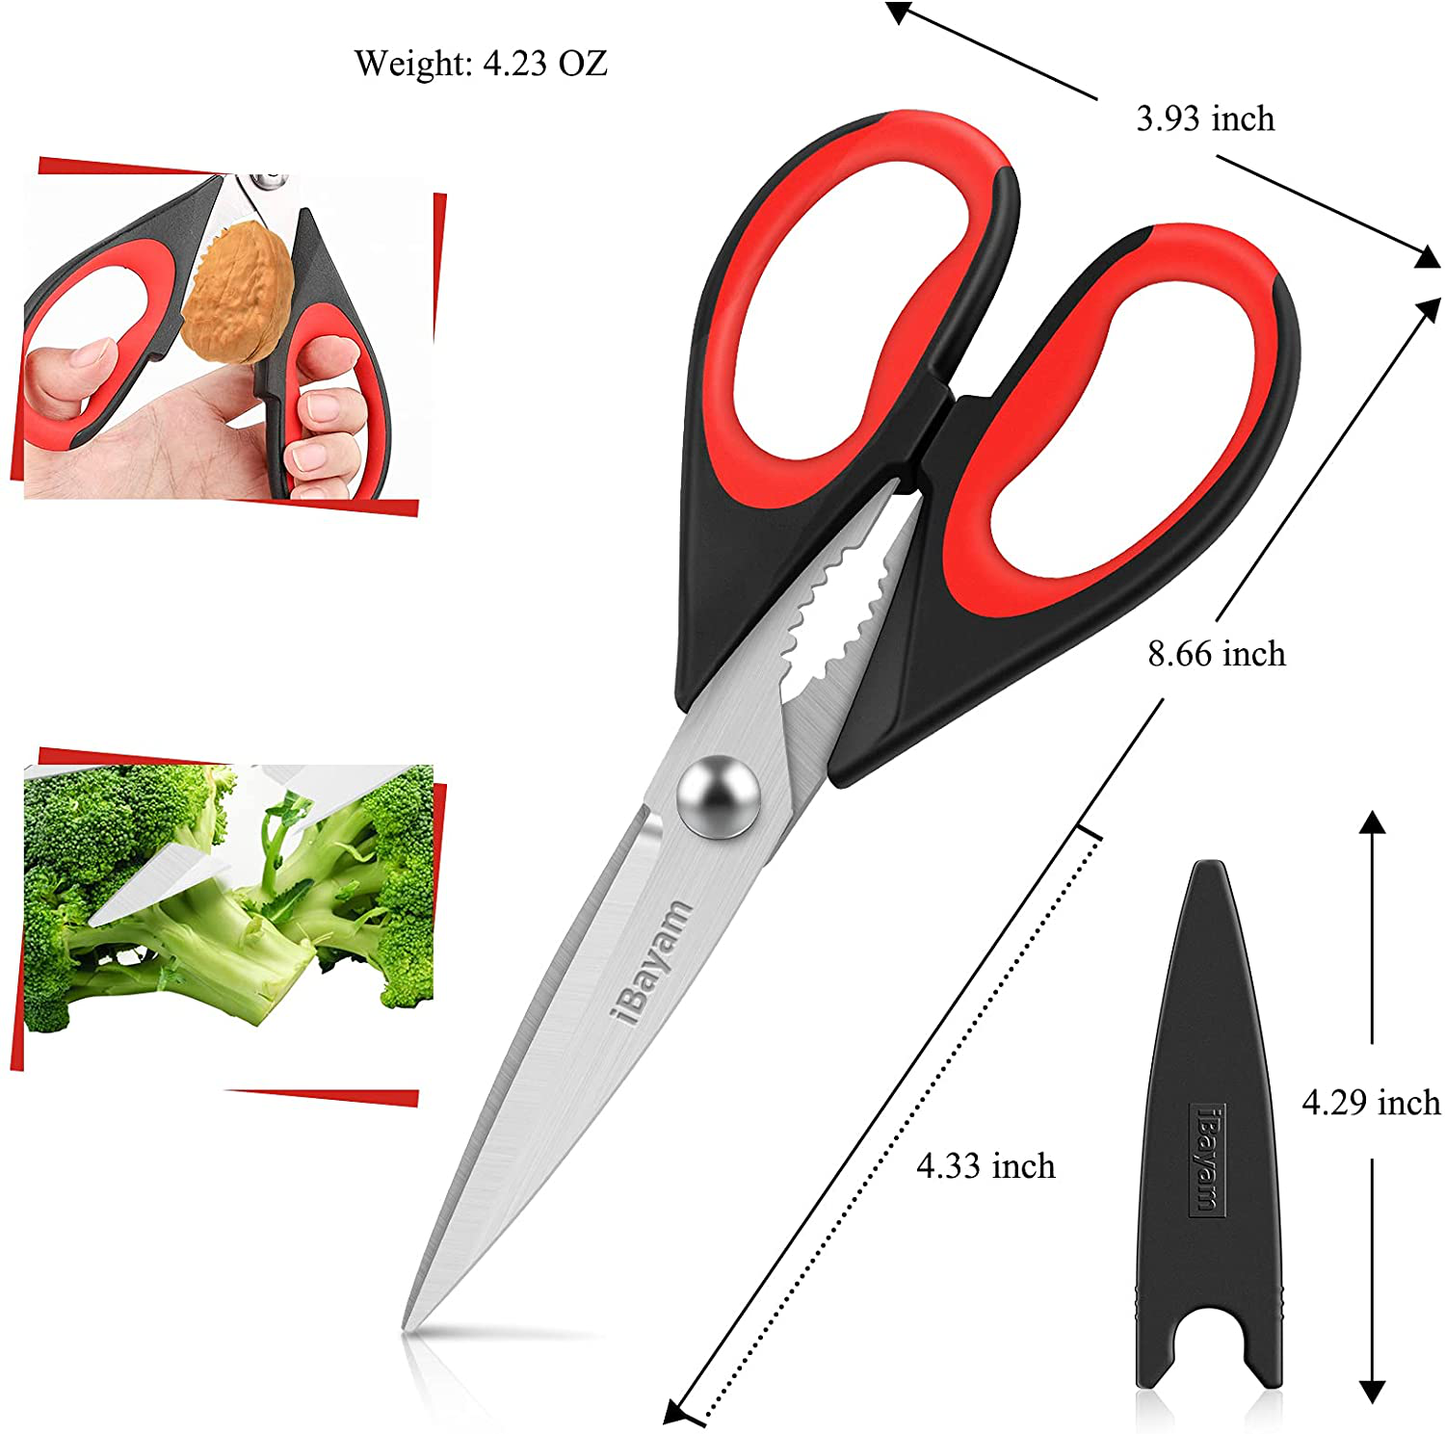 Kitchen Shears, iBayam 2-Pack Kitchen Scissors Heavy Duty Meat Scissors, Dishwasher Safe Cooking Scissors, Multipurpose Stainless Steel Sharp Utility Food Scissors for Chicken, Poultry, Fish, Herbs